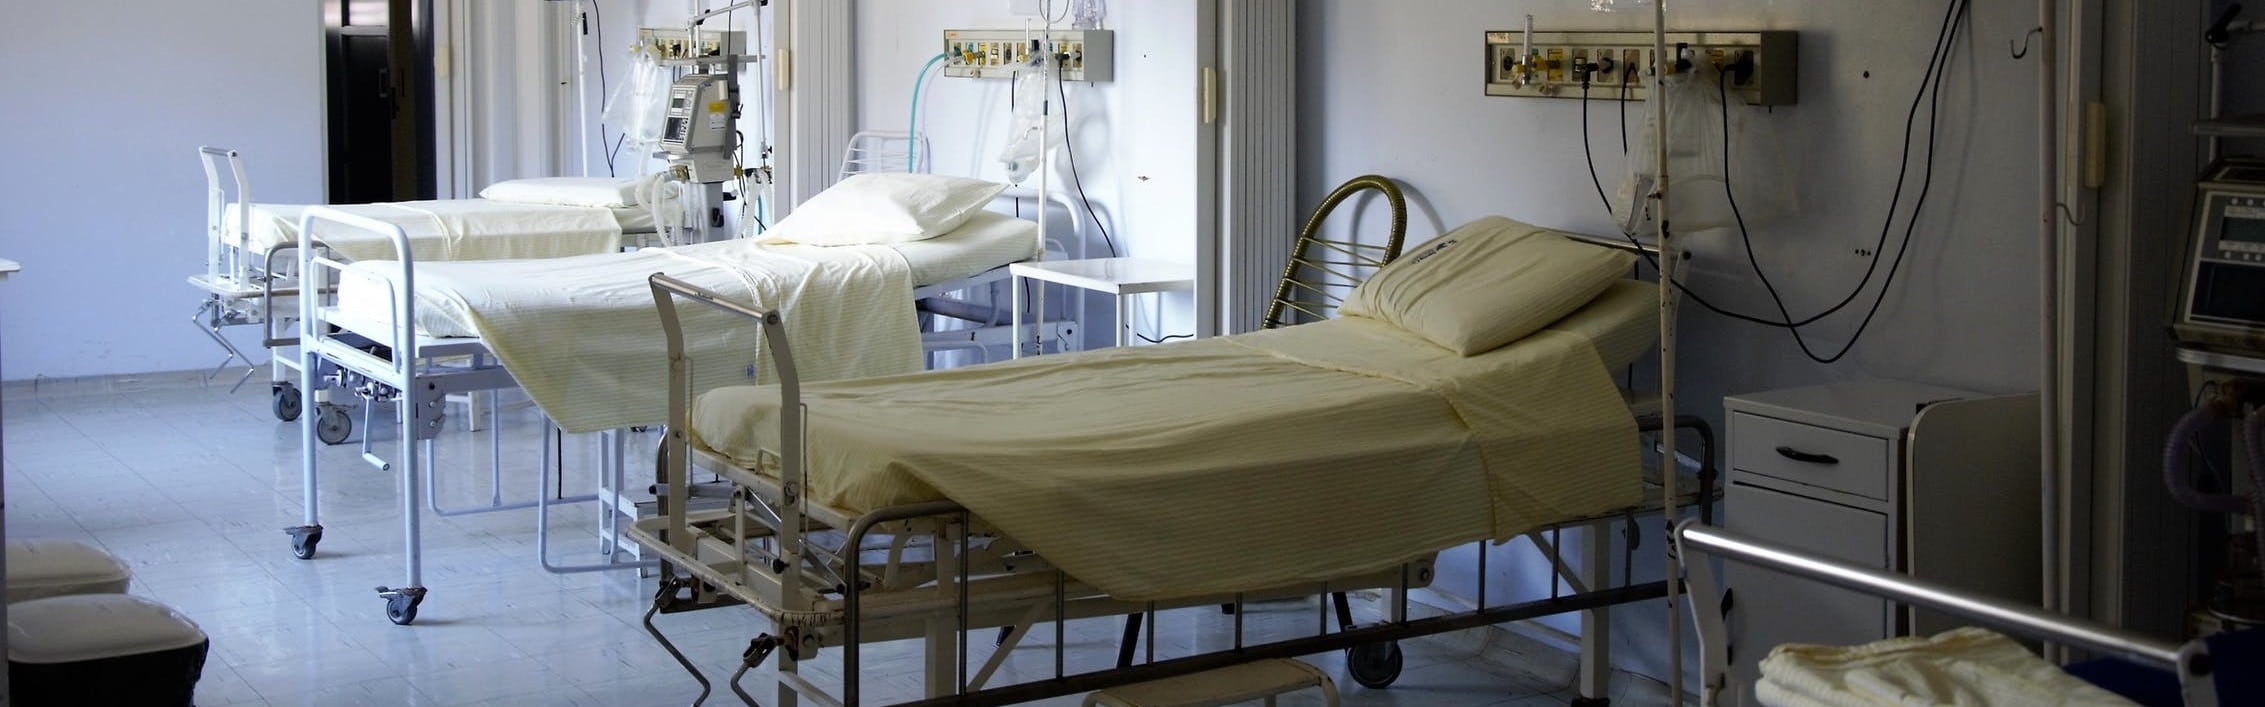 Three hospital beds in a hospital room.